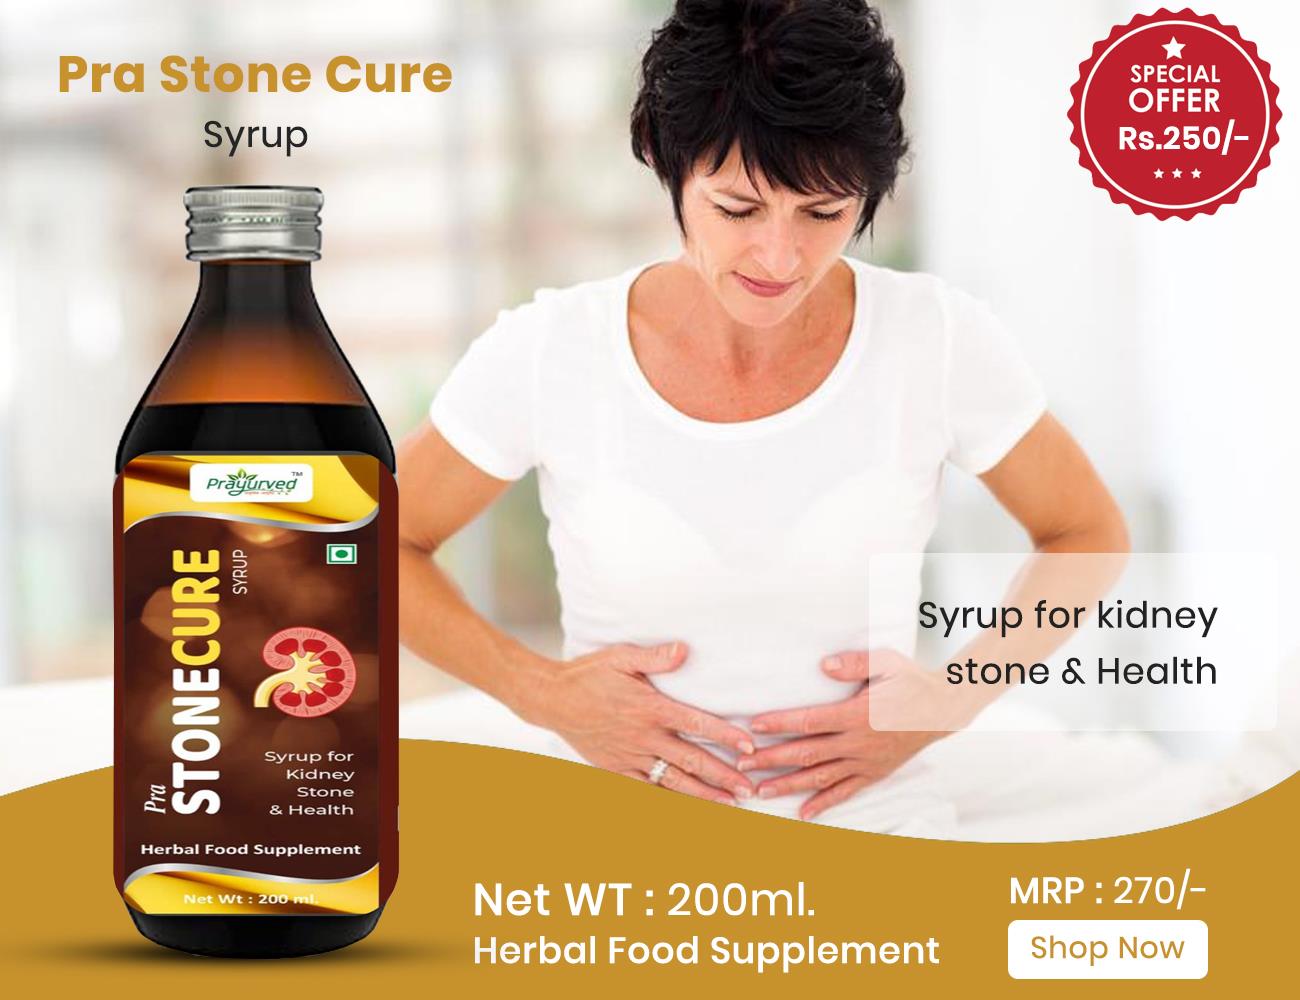 Pra Stone Cure Syrup